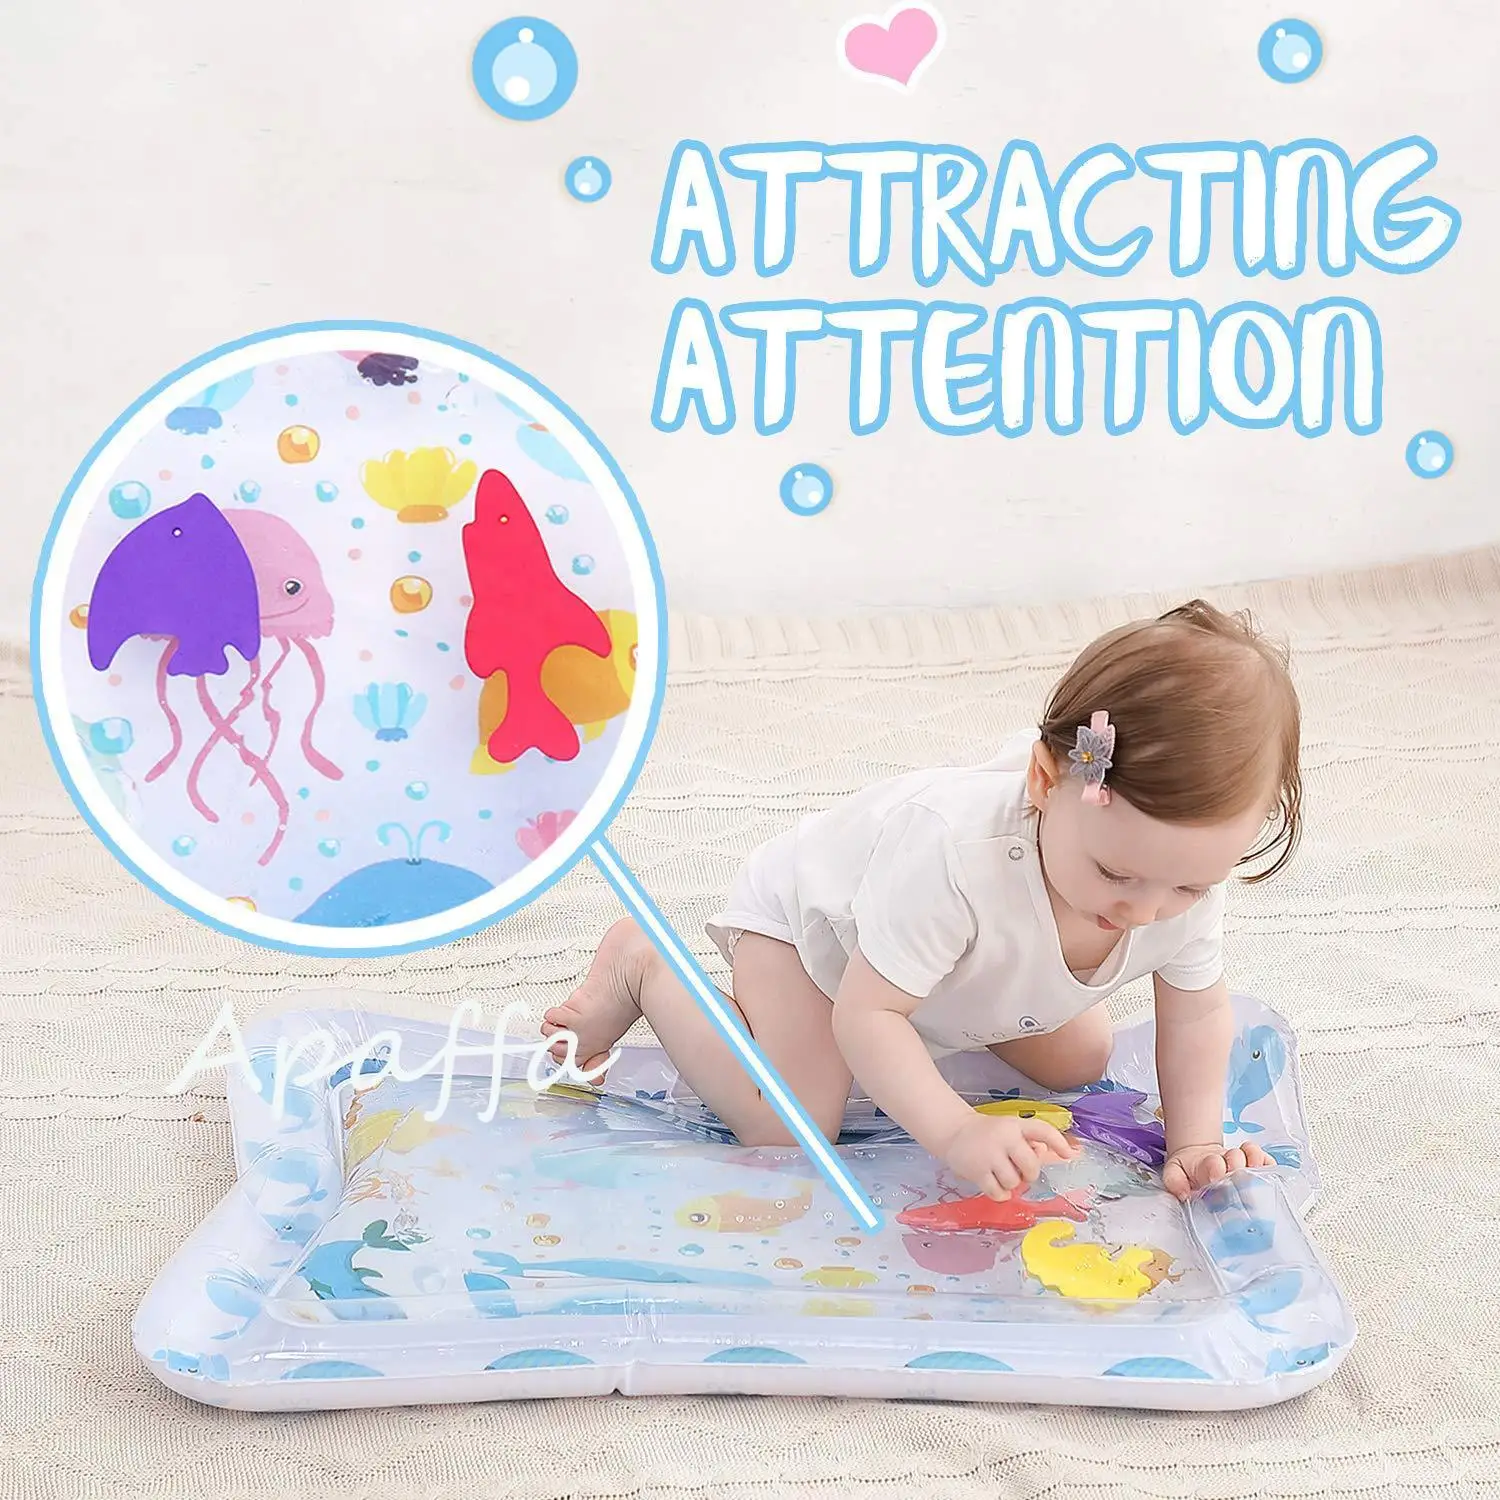 

Baby Kids Water Play Mat Toys Inflatable Thicken PVC Infant Tummy Time Playmat Toddler Activity Play Center Water Mat for Babies